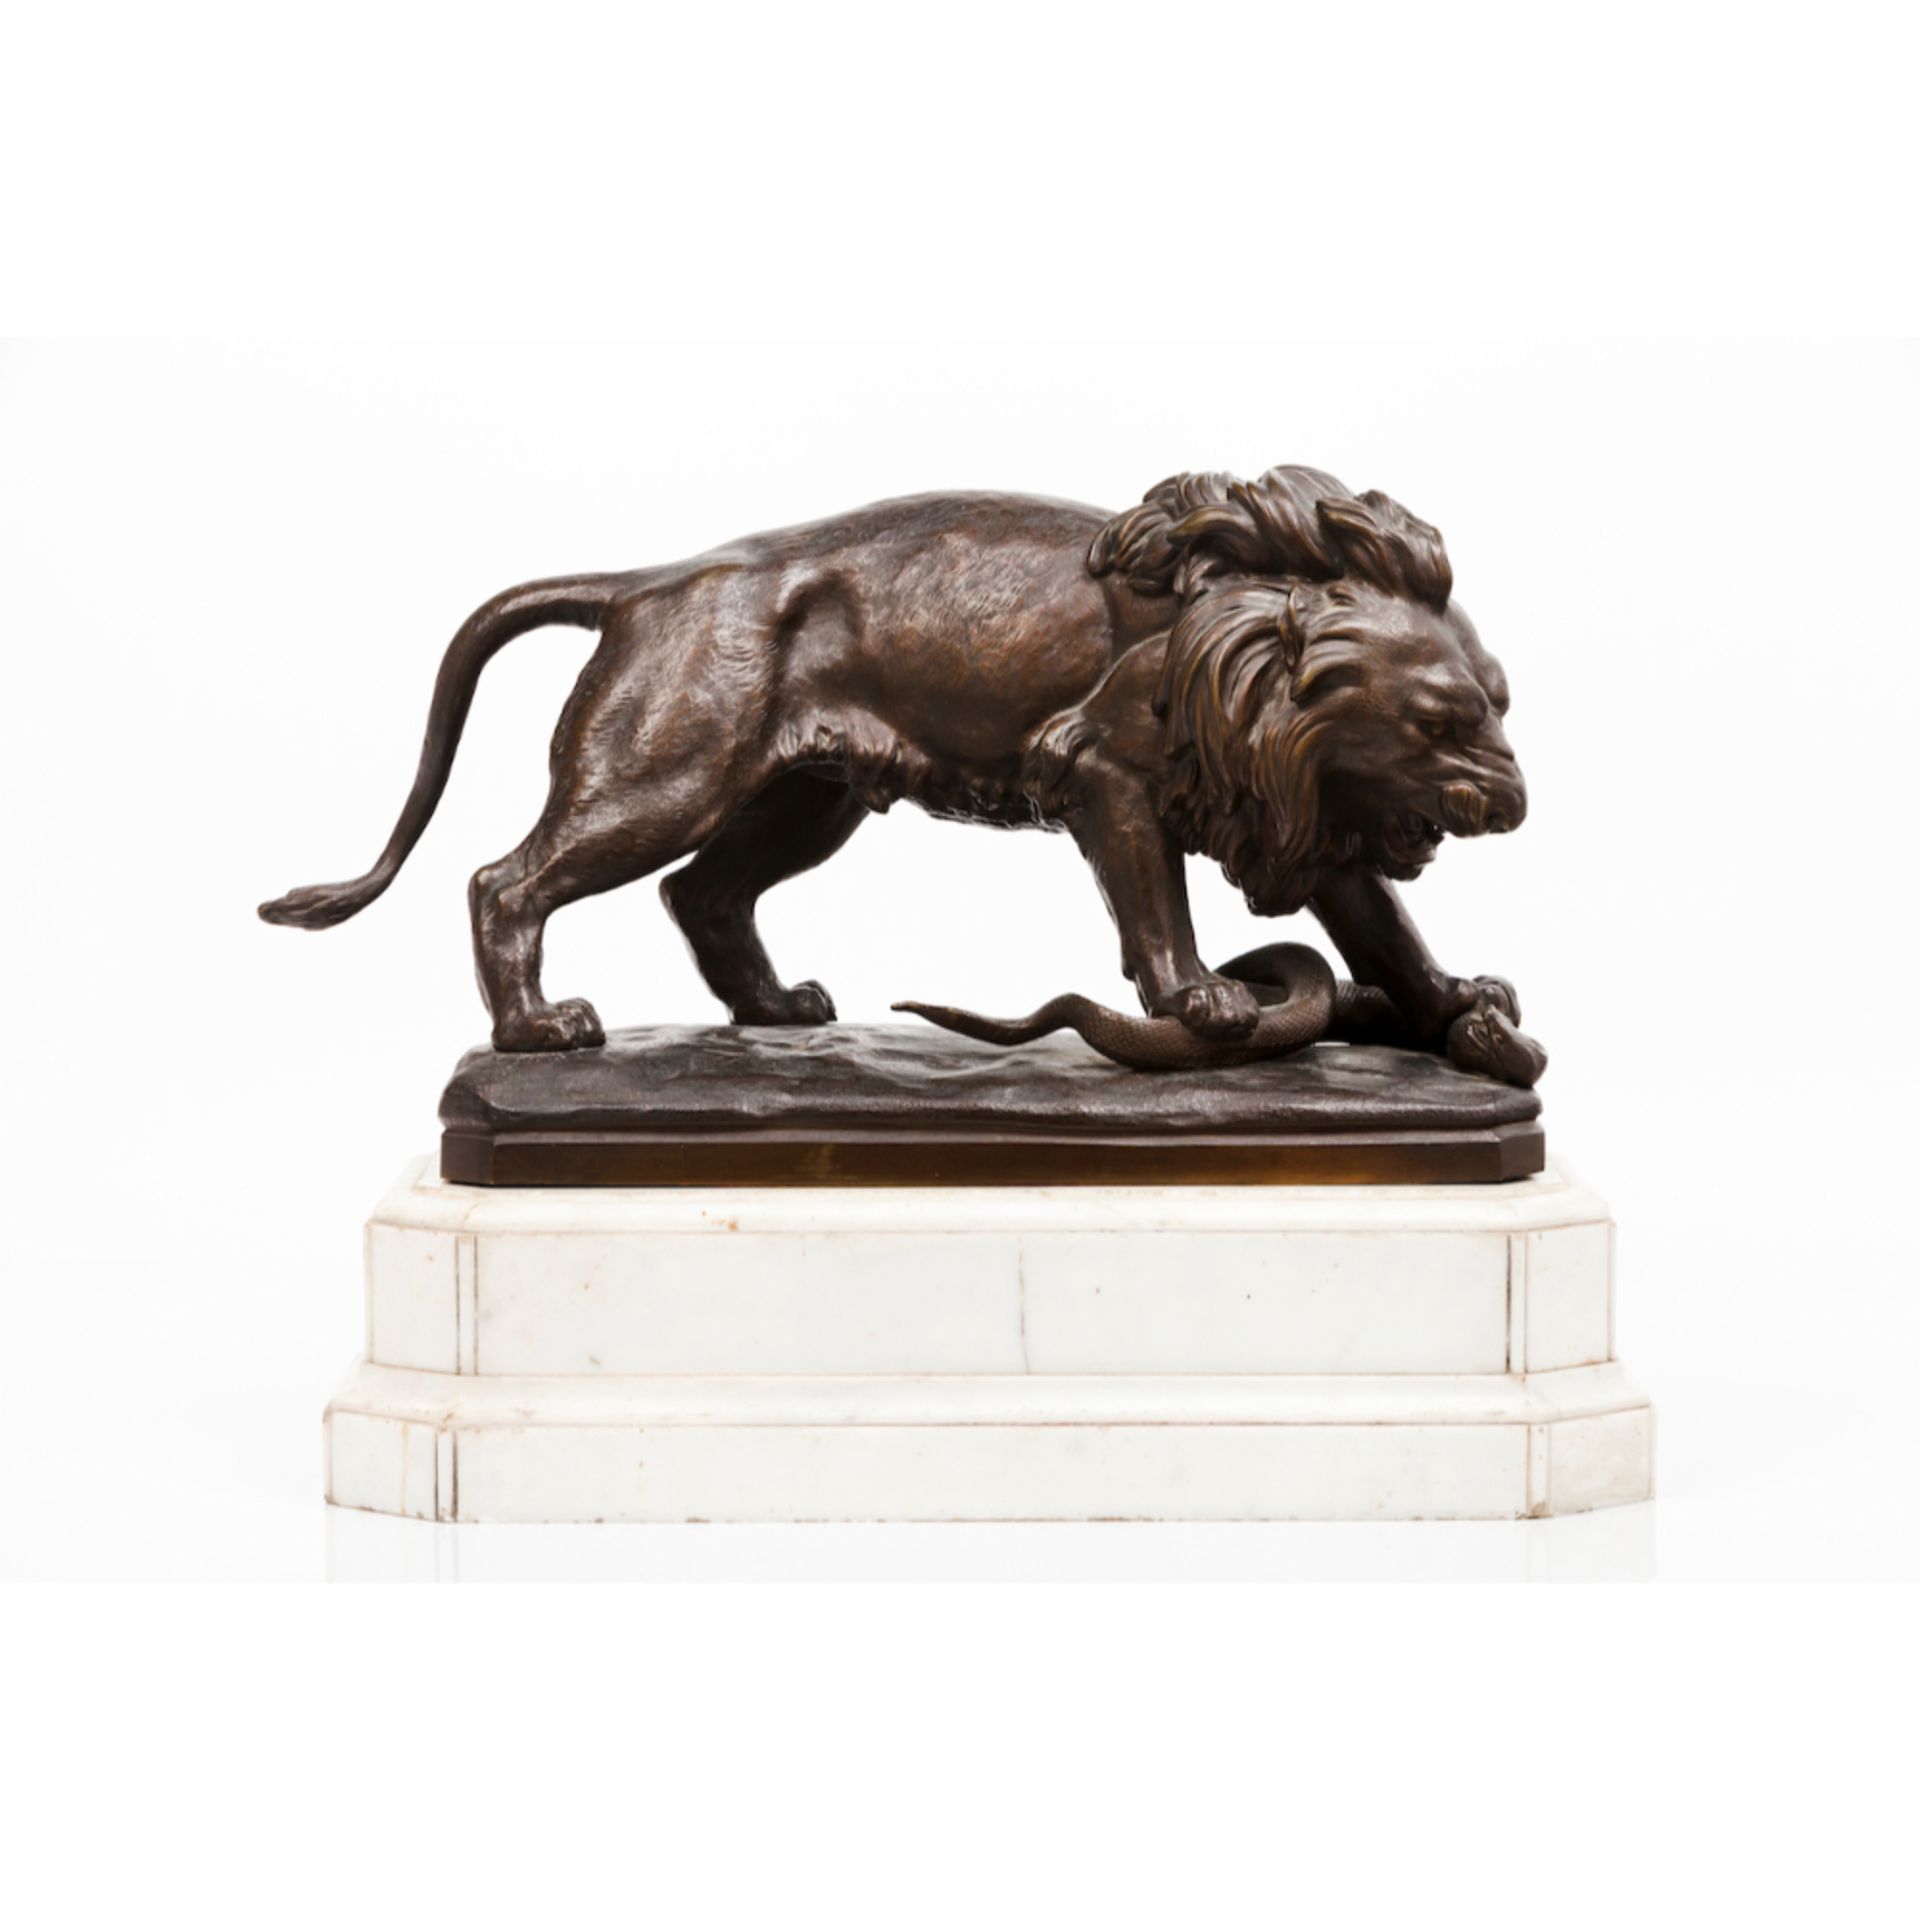 A lion crushing a snakePatinated bronze sculpture White marble stand44,5x62 cm